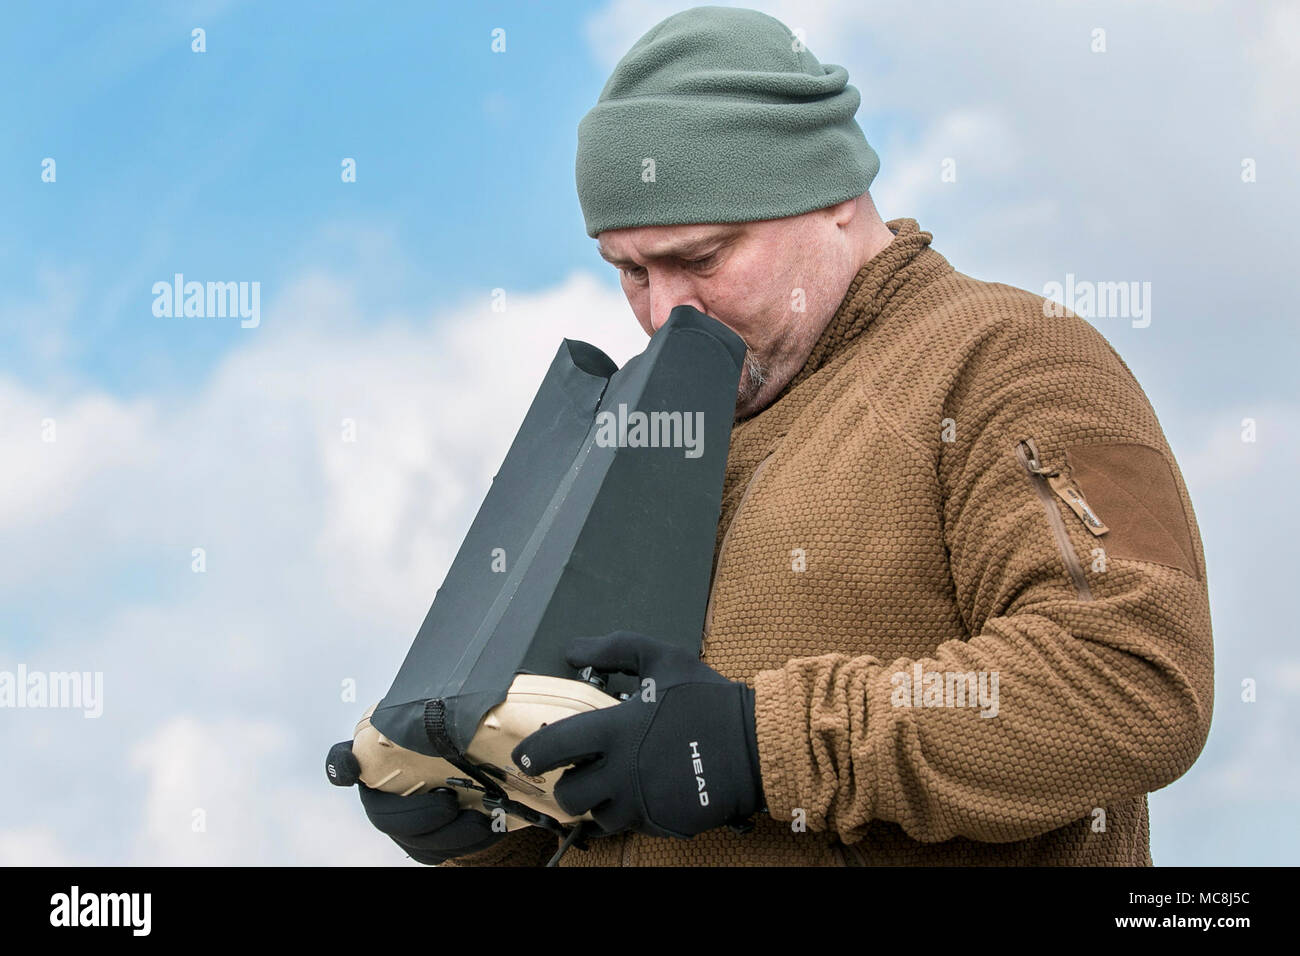 Michael Knox, a Puma operator, uses a remote control system to operate the aerial asset during a multinational joint equipment training brief April 2, 2018 in Grafenwoehr, Germany in preparation for a Robotic Complex Breach Concept demonstration. The Robotic Complex Breach Concept includes the employment of Robotic and Autonomous Systems (RAS) in intelligence, suppression, obscuration, and reduction. Stock Photo